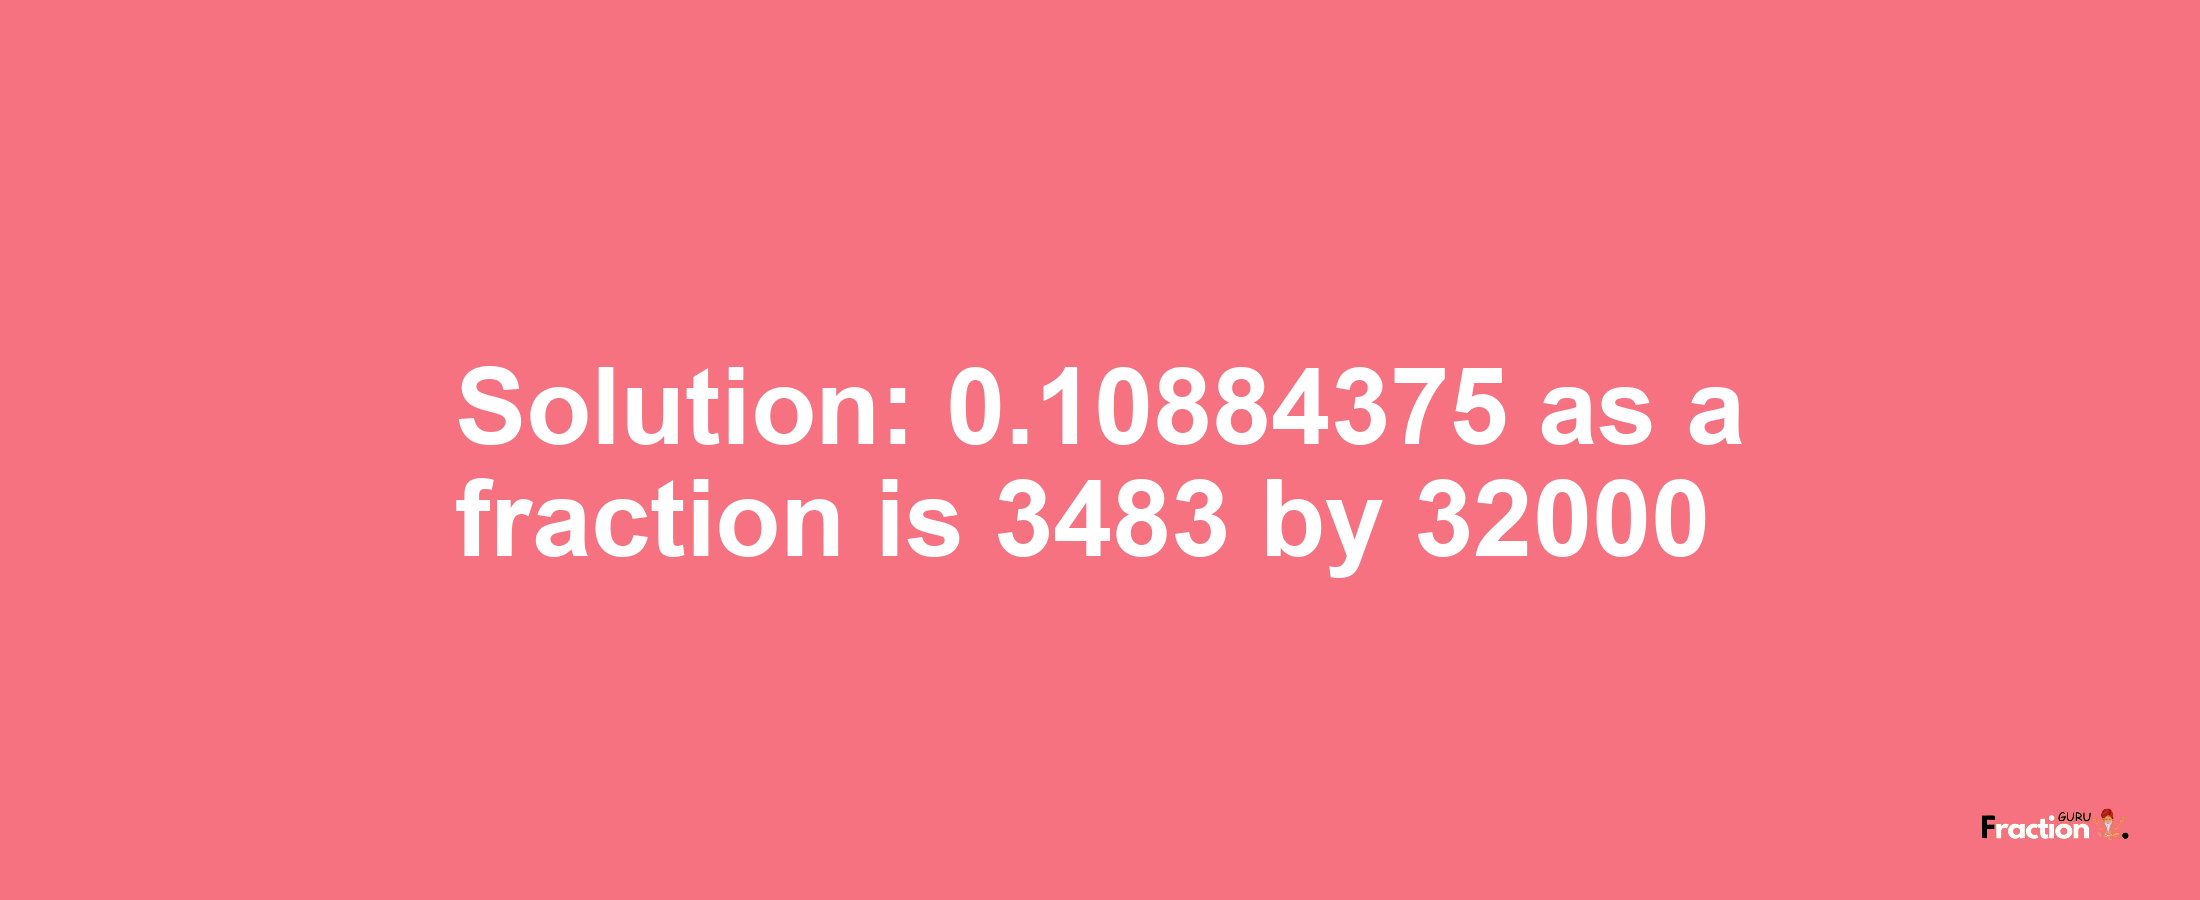 Solution:0.10884375 as a fraction is 3483/32000